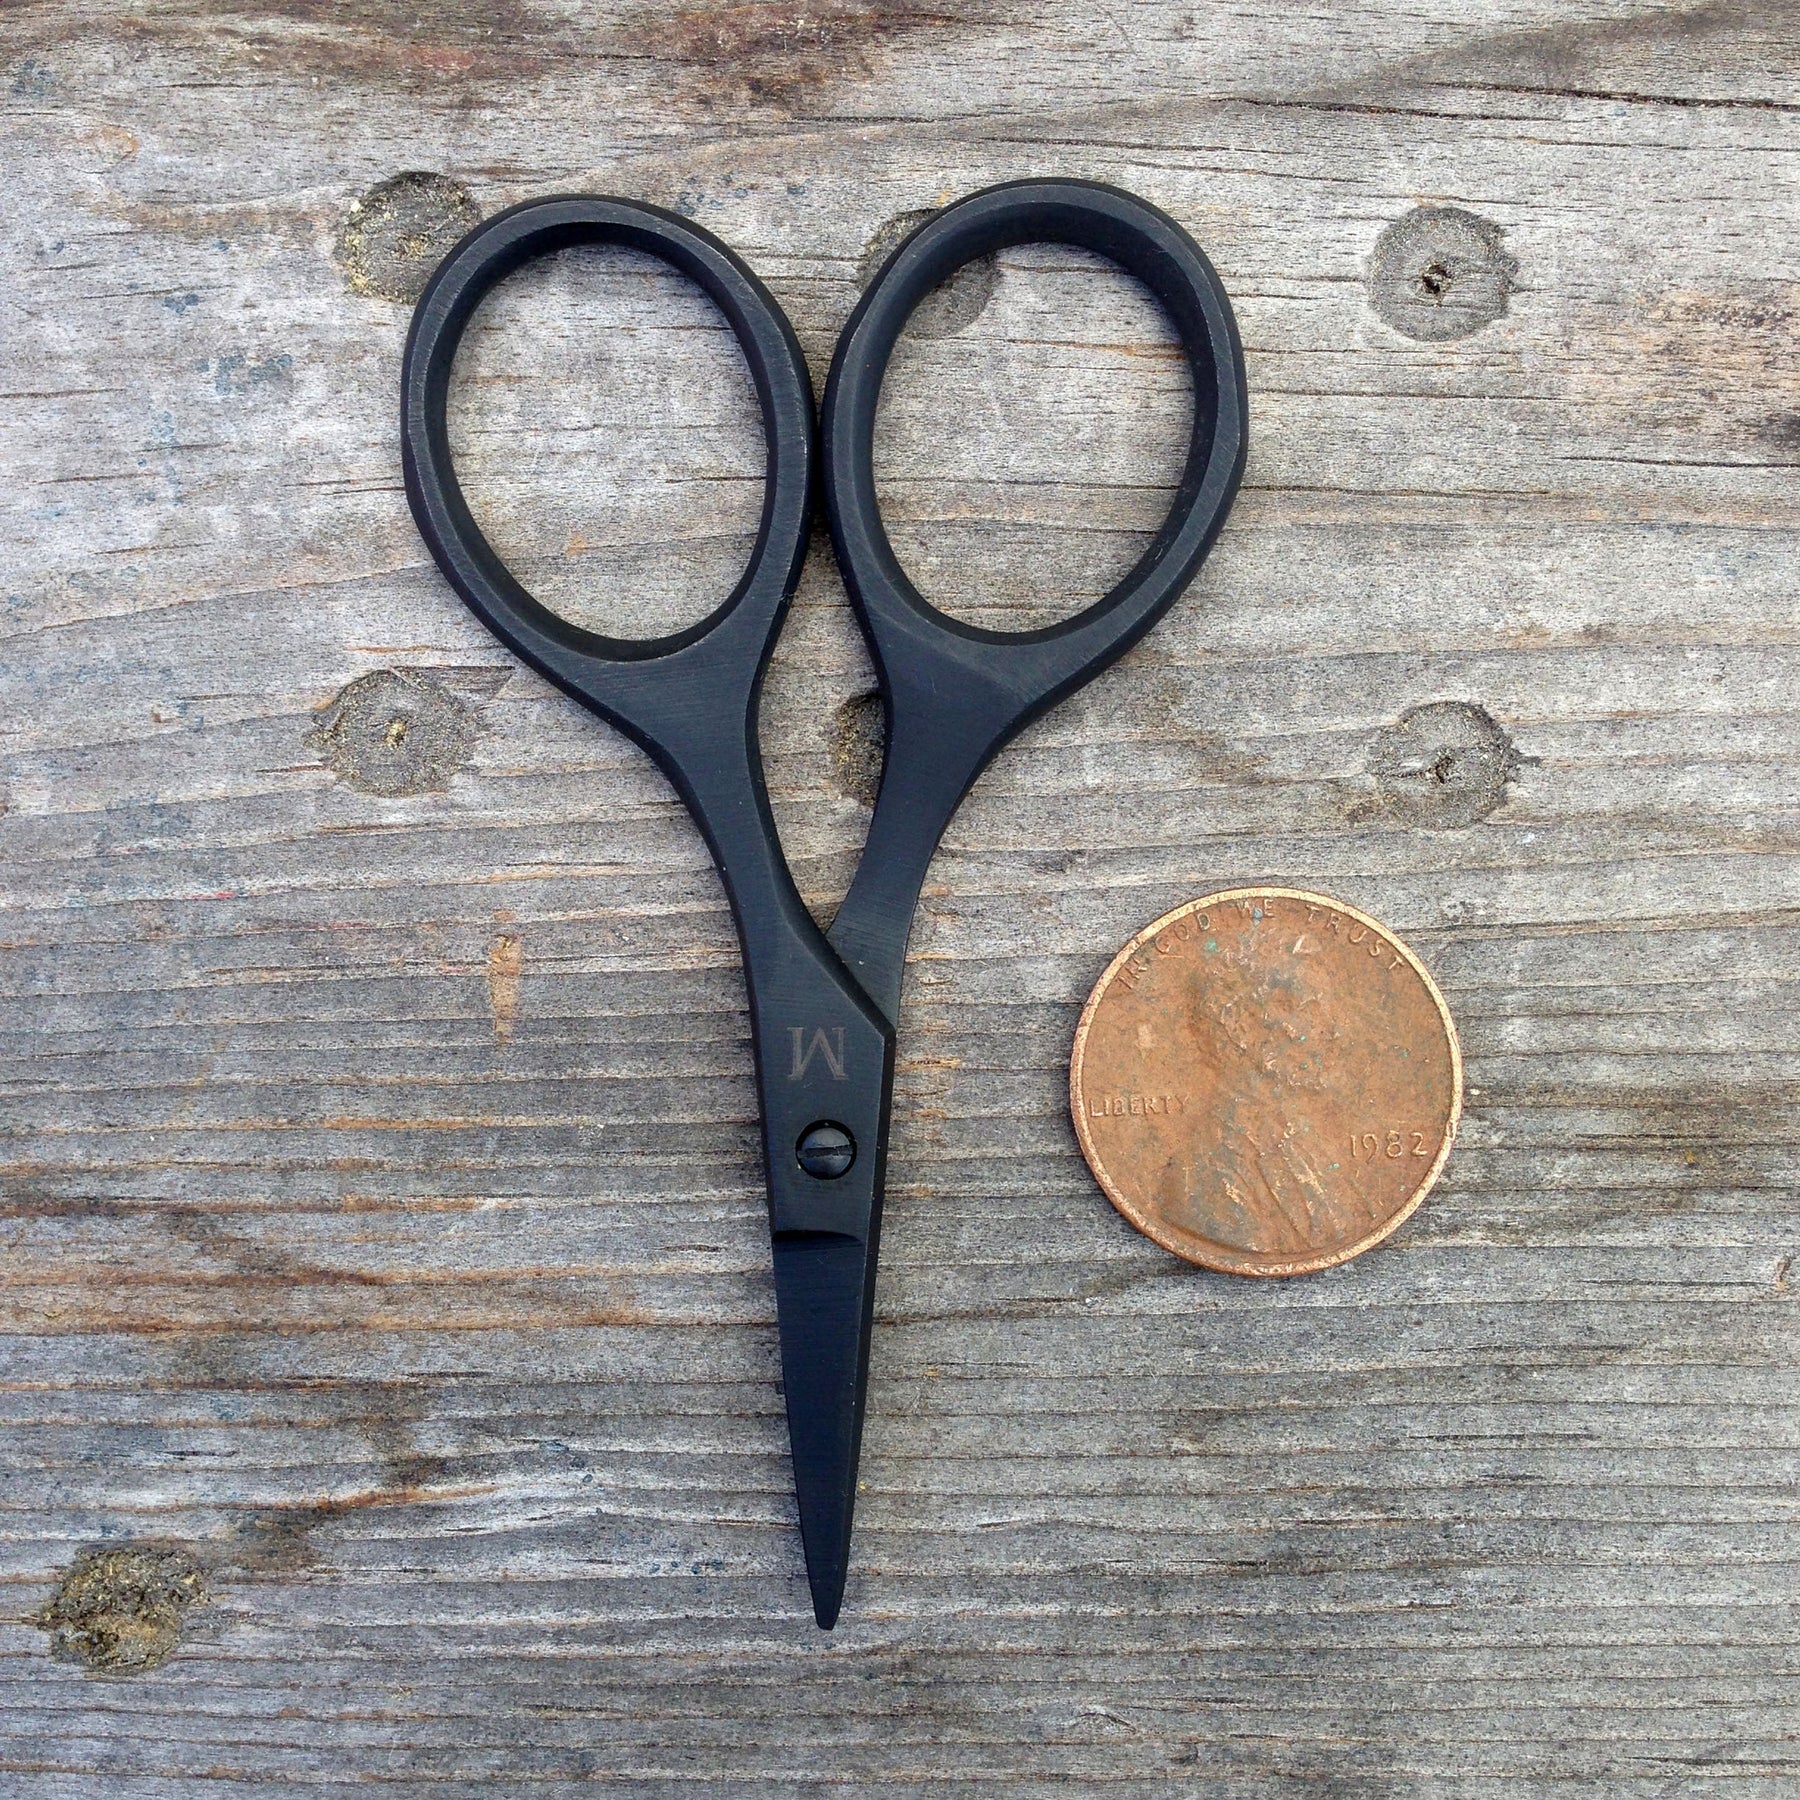 FOR THE LOVE OF TOOLS: SCISSORS - Alabama Chanin